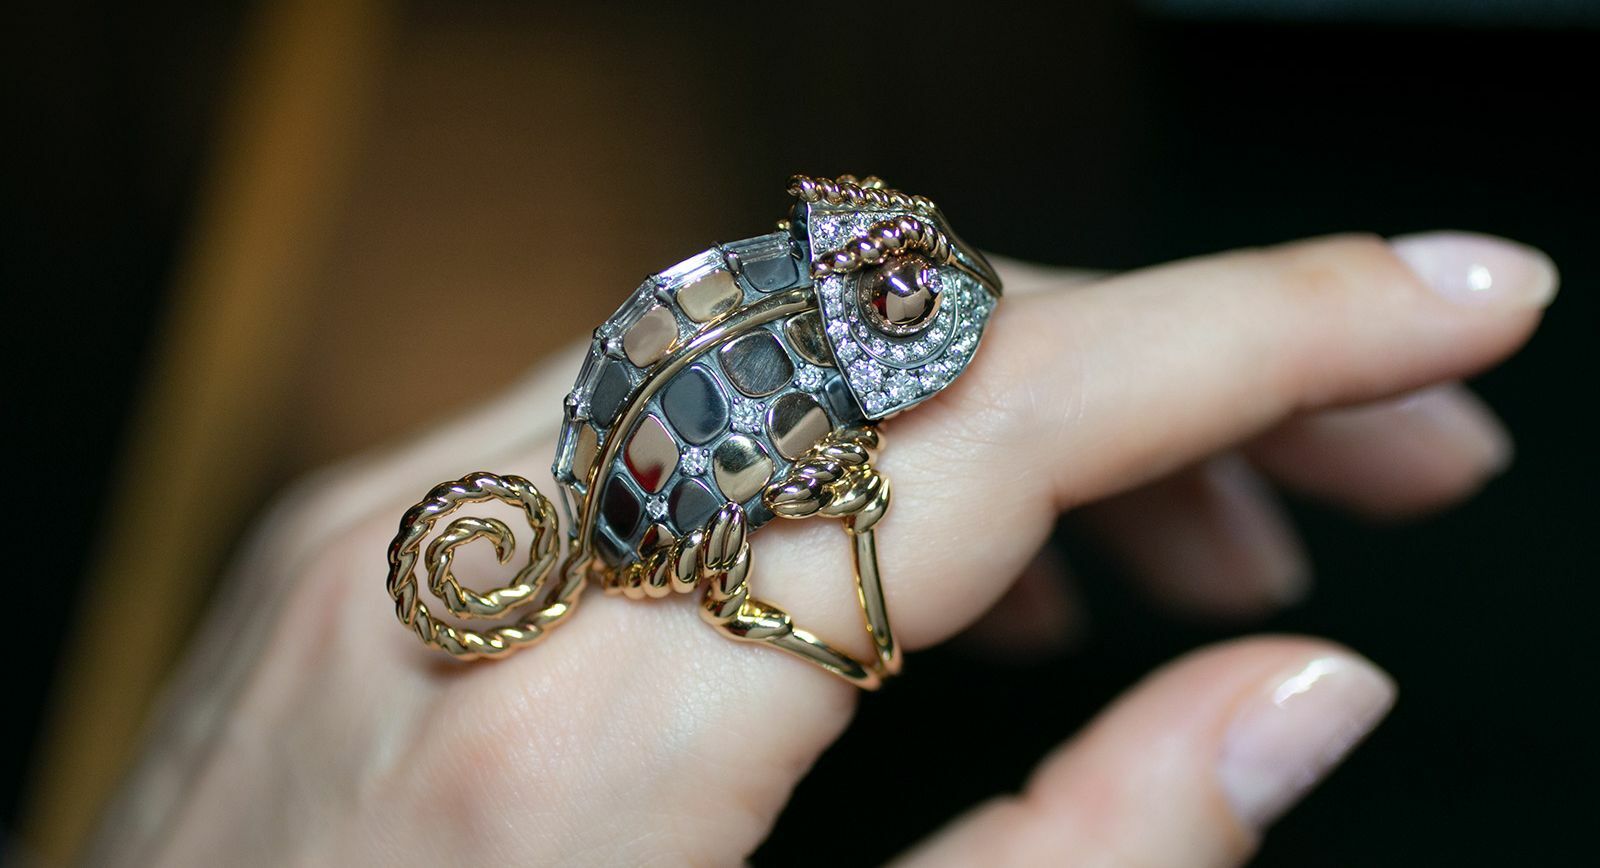 Elie Top Chameleon ring from the Magica Naturae Collection